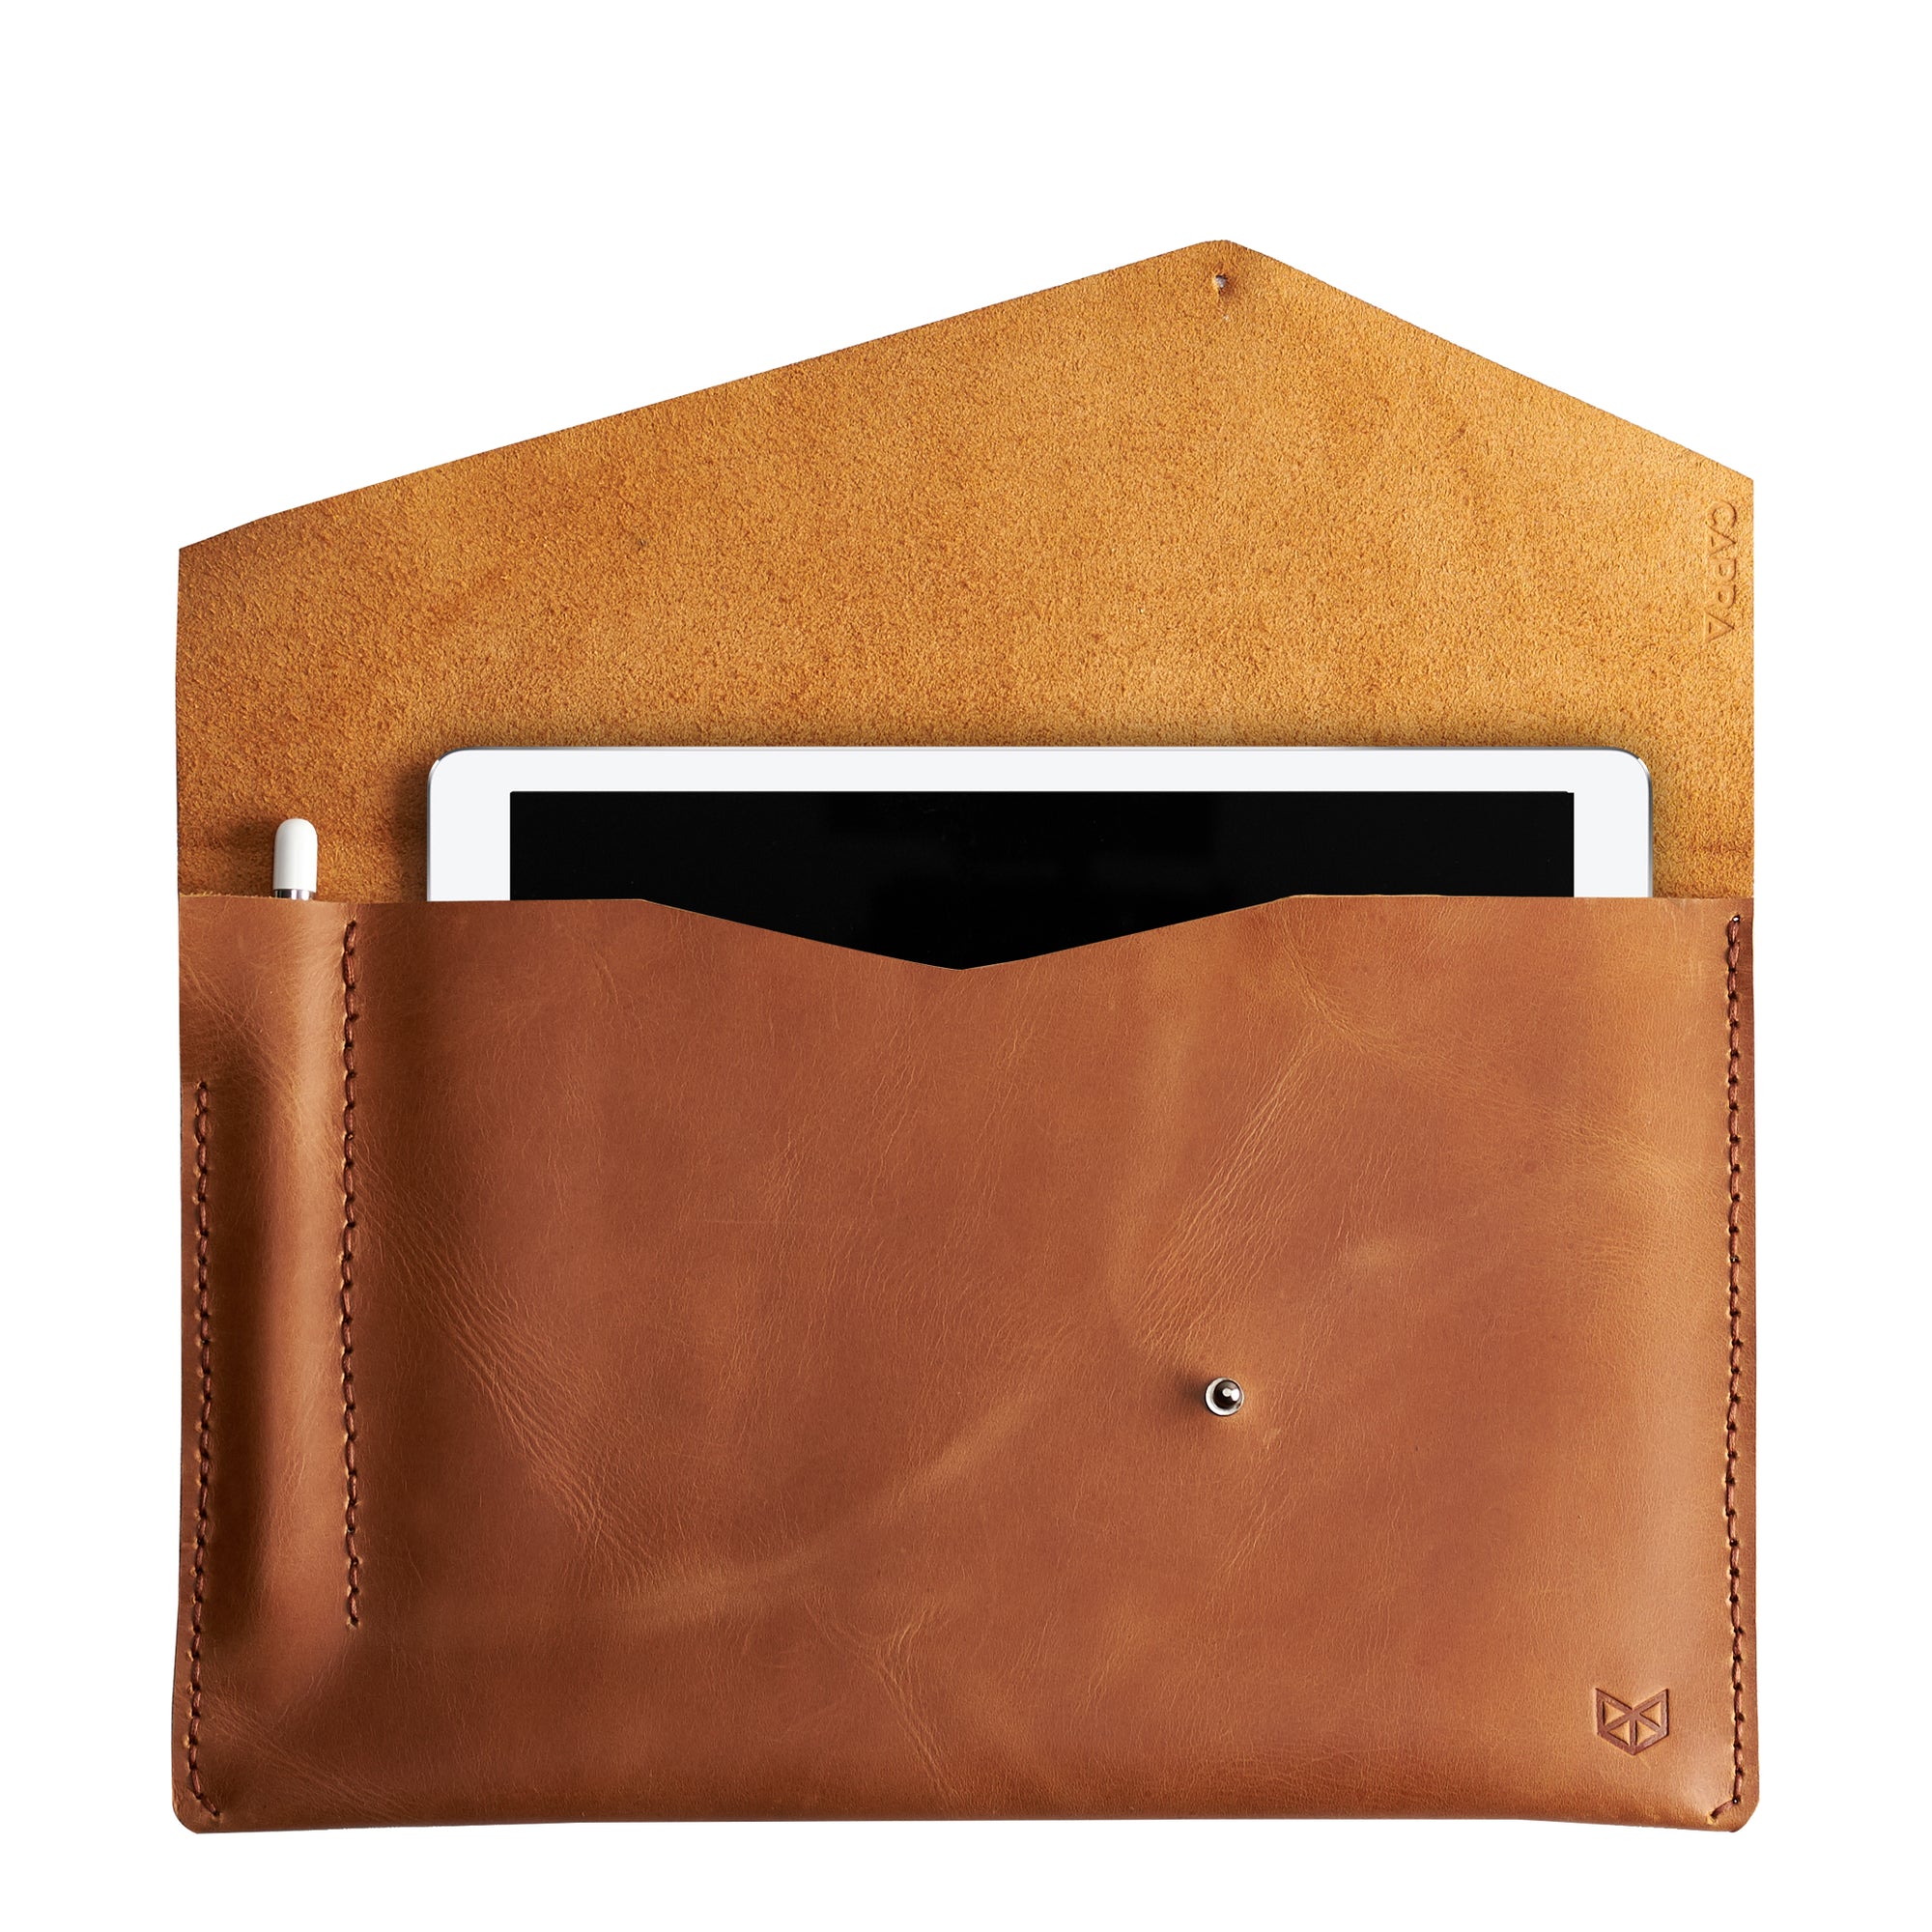 Light brown leather sleeve for iPad pro. Case for Pixel Slate. Mens gifts